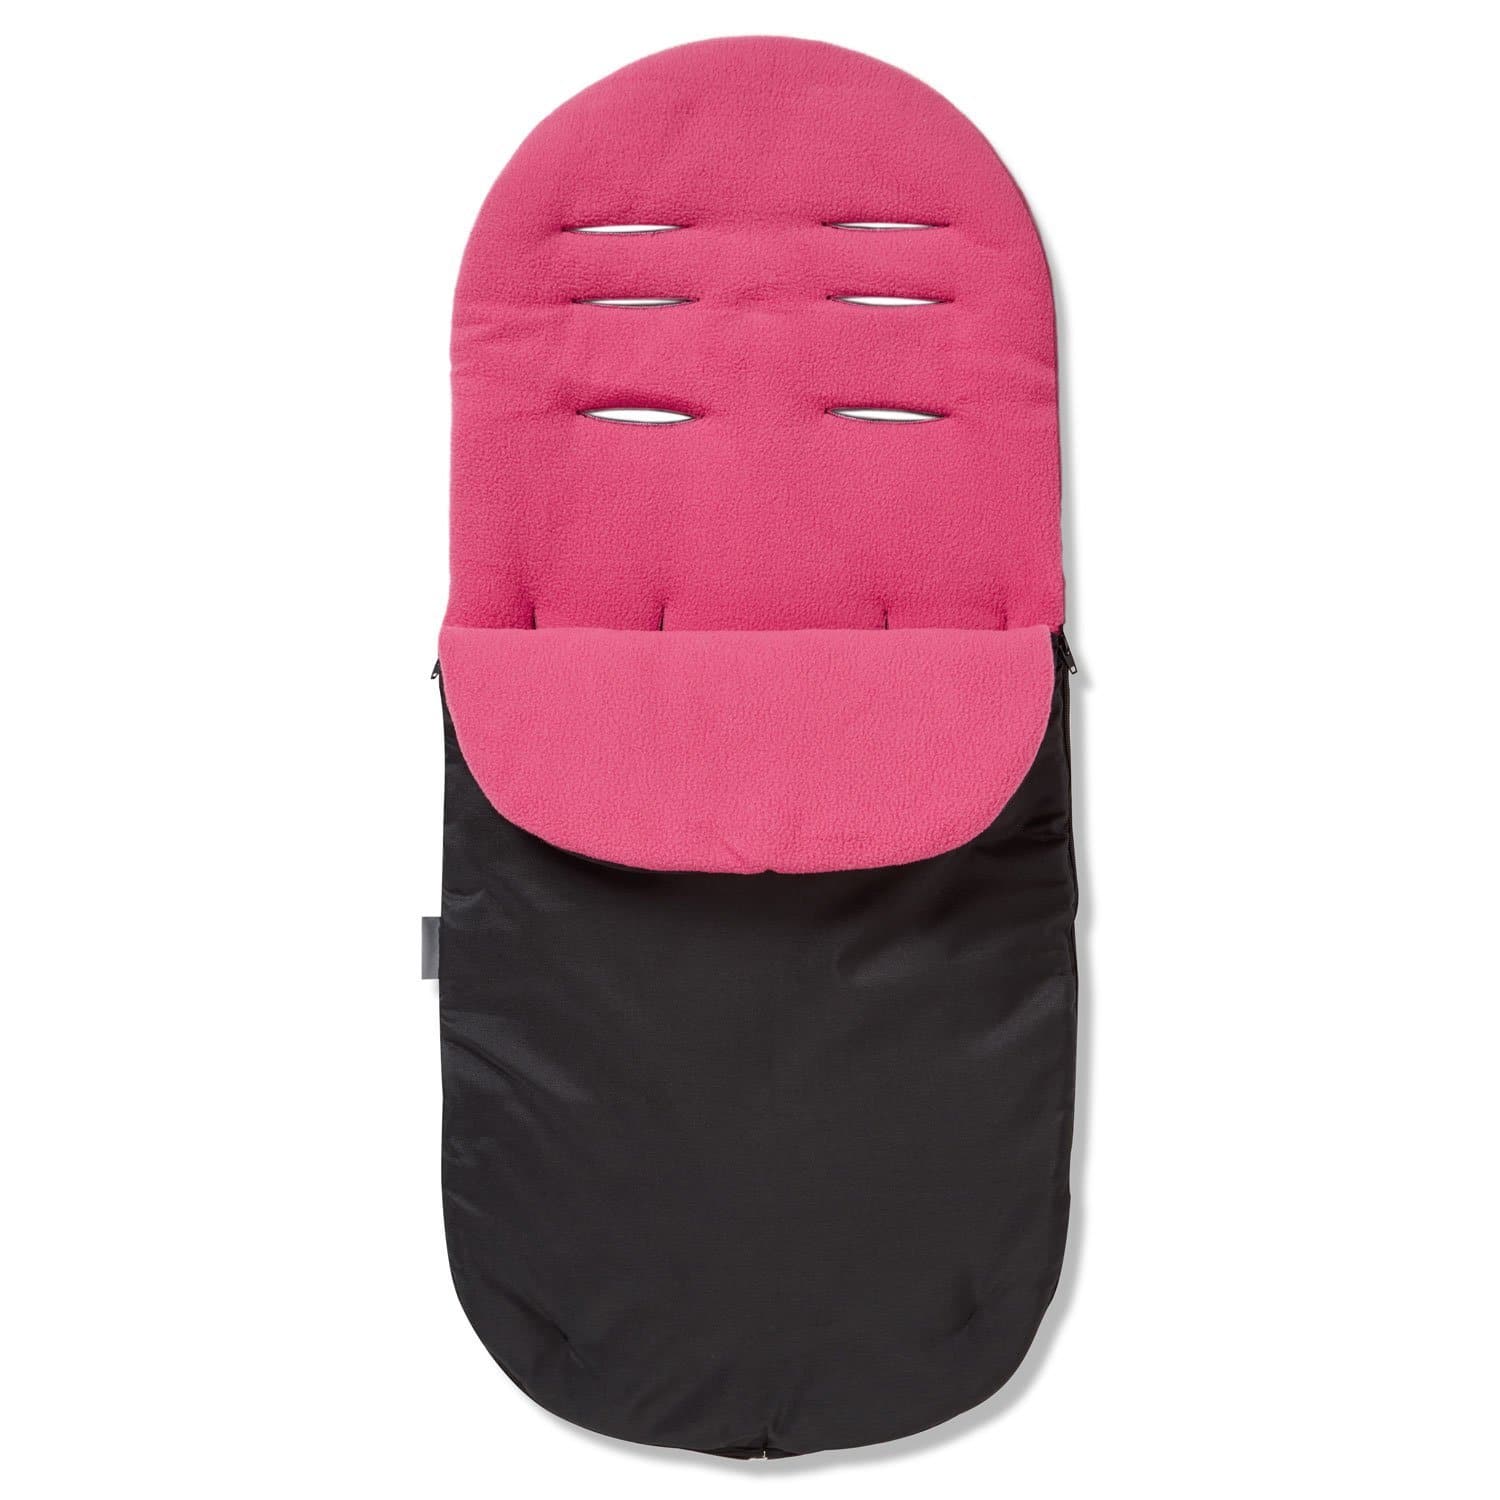 Footmuff / Cosy Toes Compatible with BabyCare - Dark Pink / Fits All Models | For Your Little One